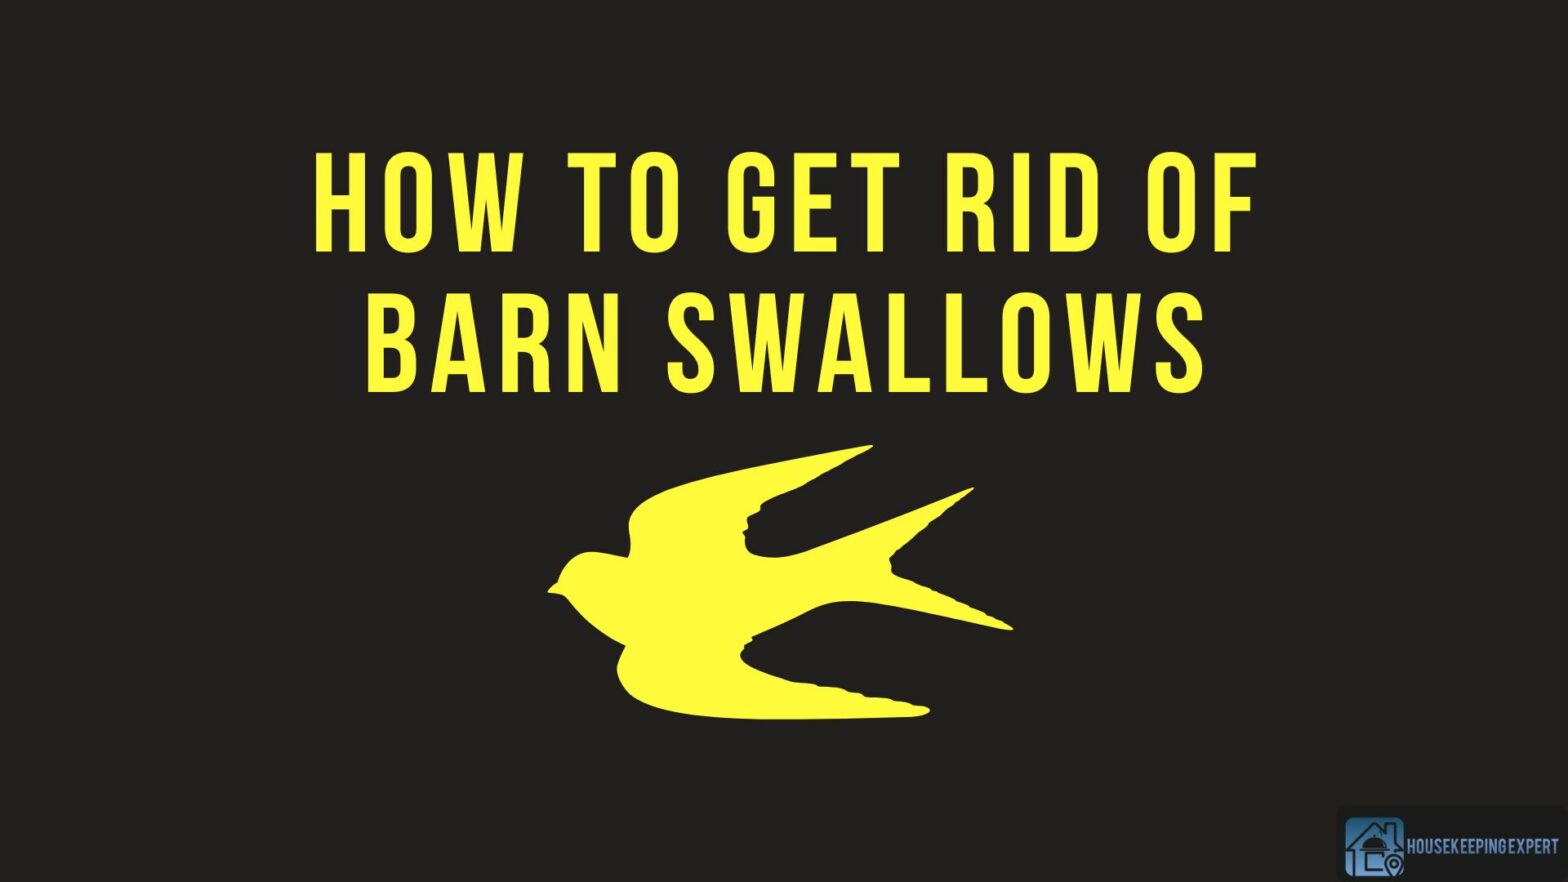 How To Get Rid Of Barn Swallows